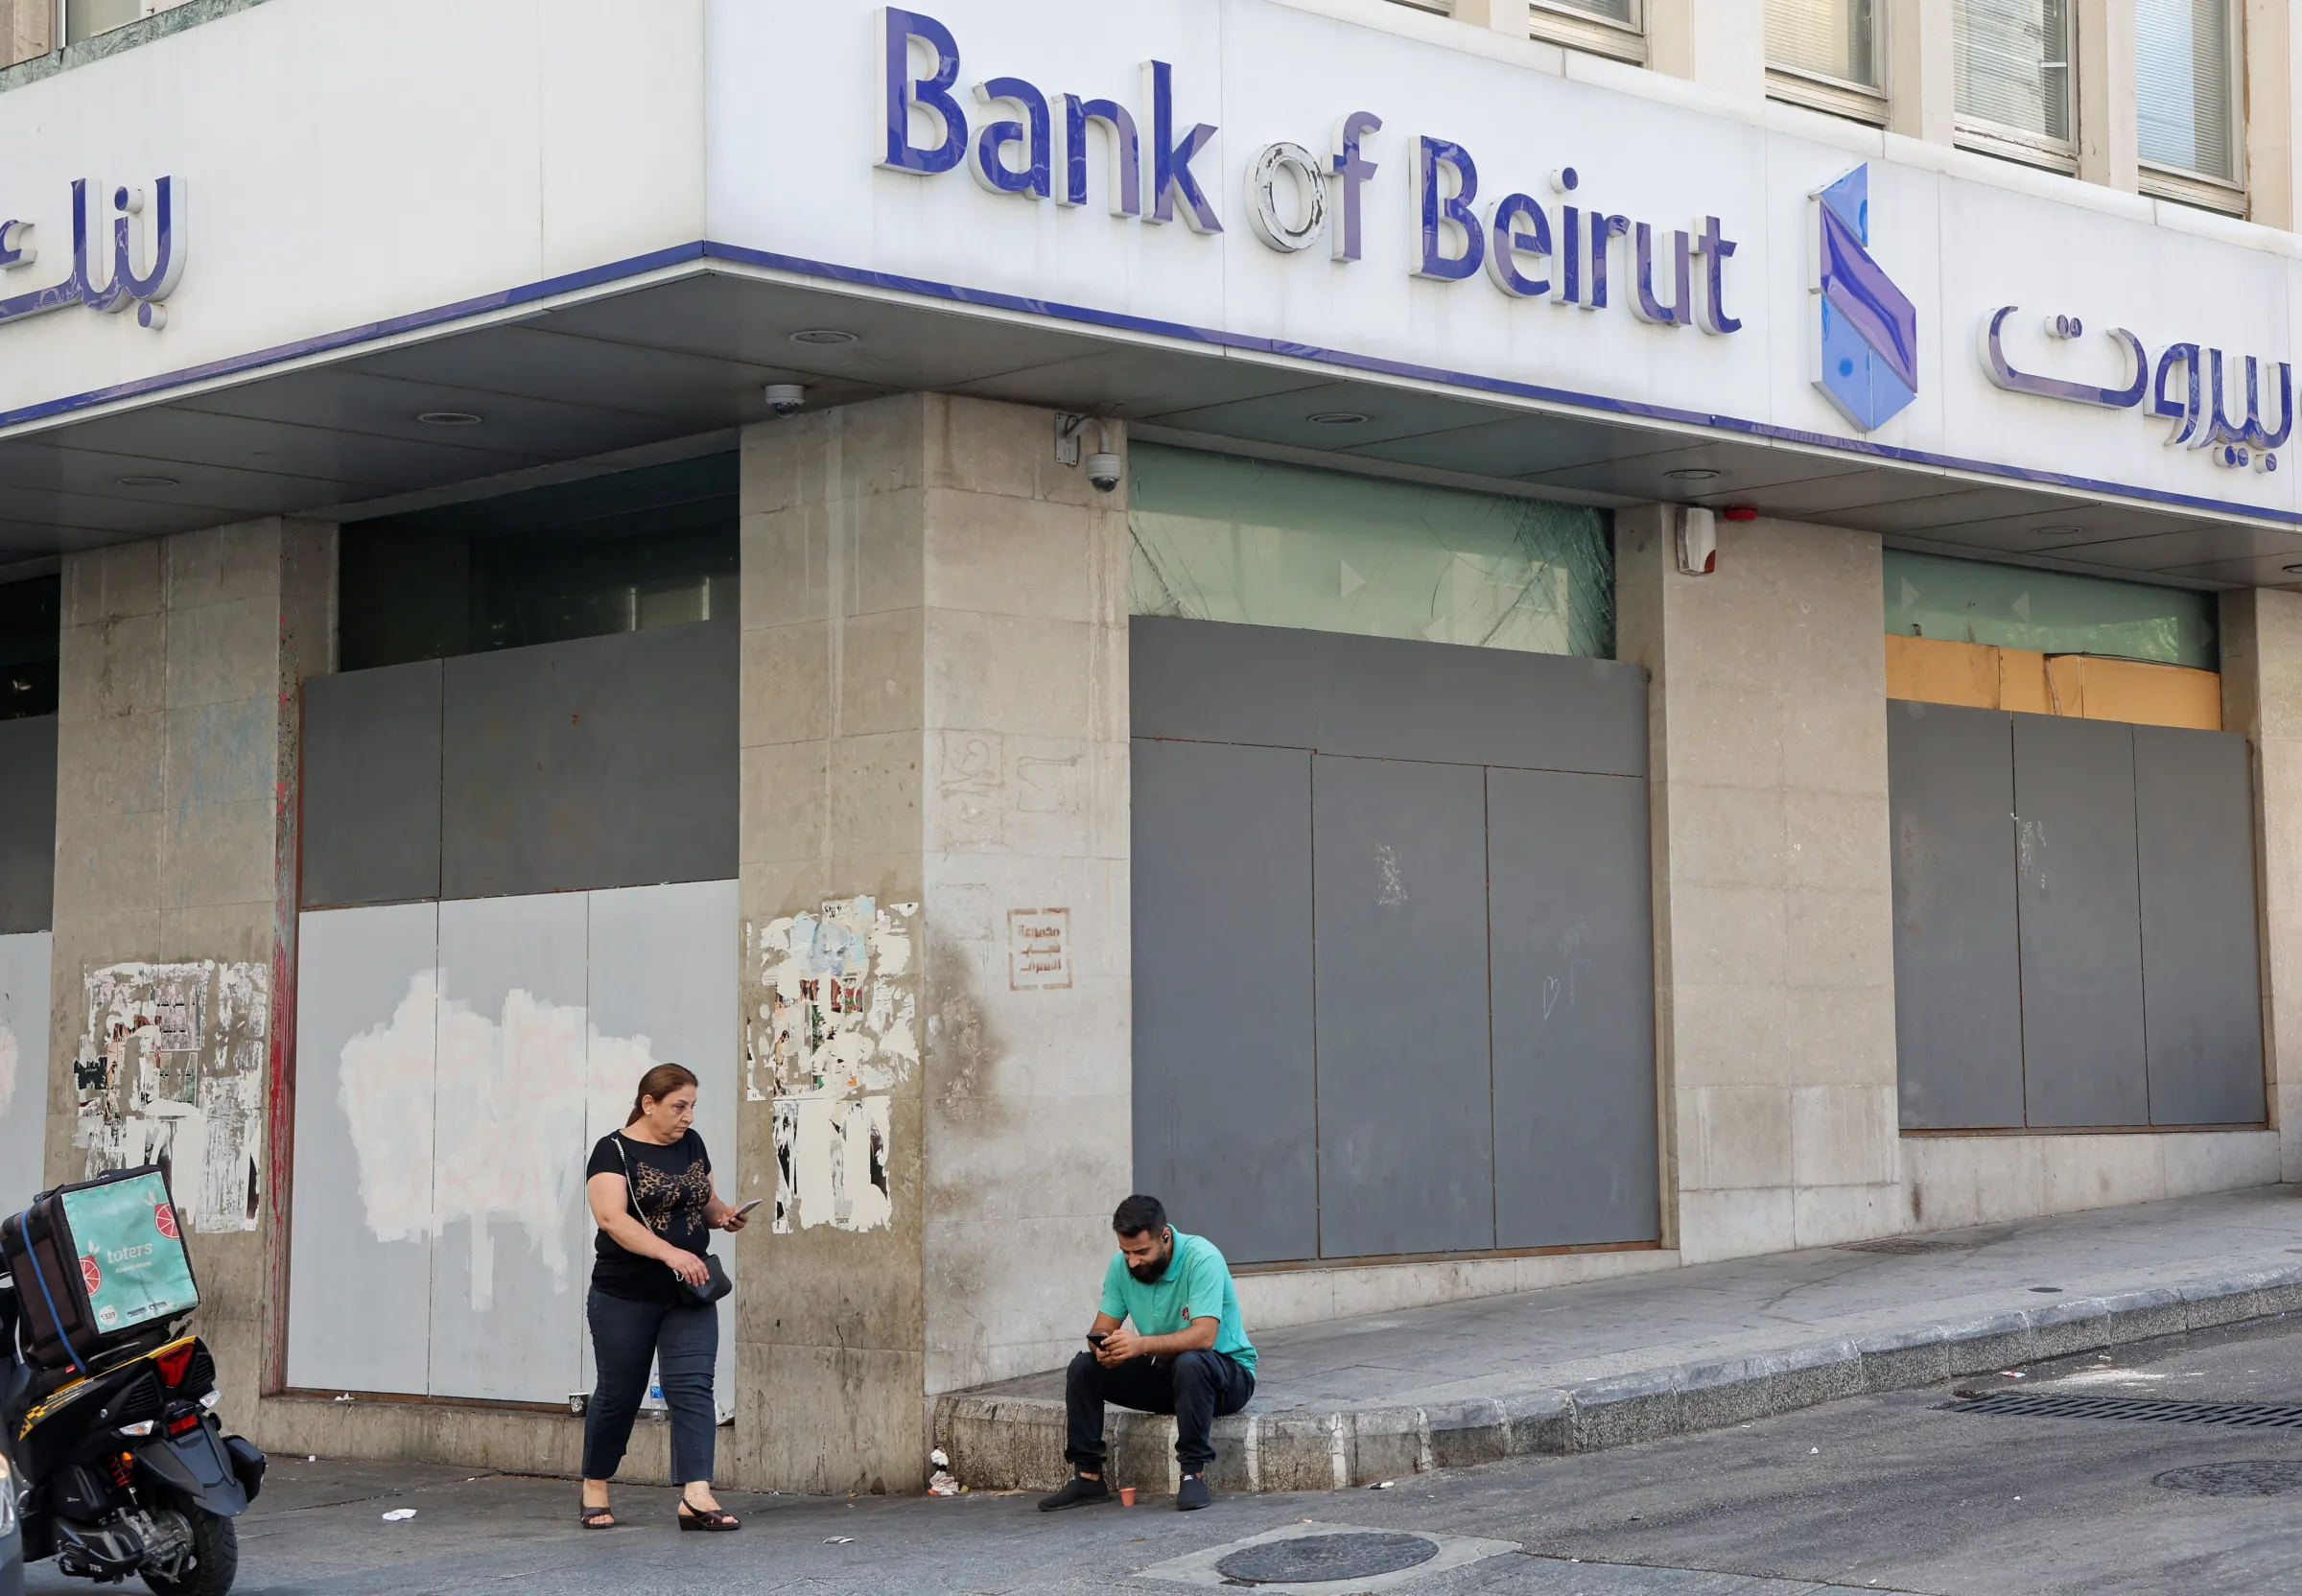 A man sits by a closed Bank of Beirut branch in Beirut, Lebanon September 20, 2022